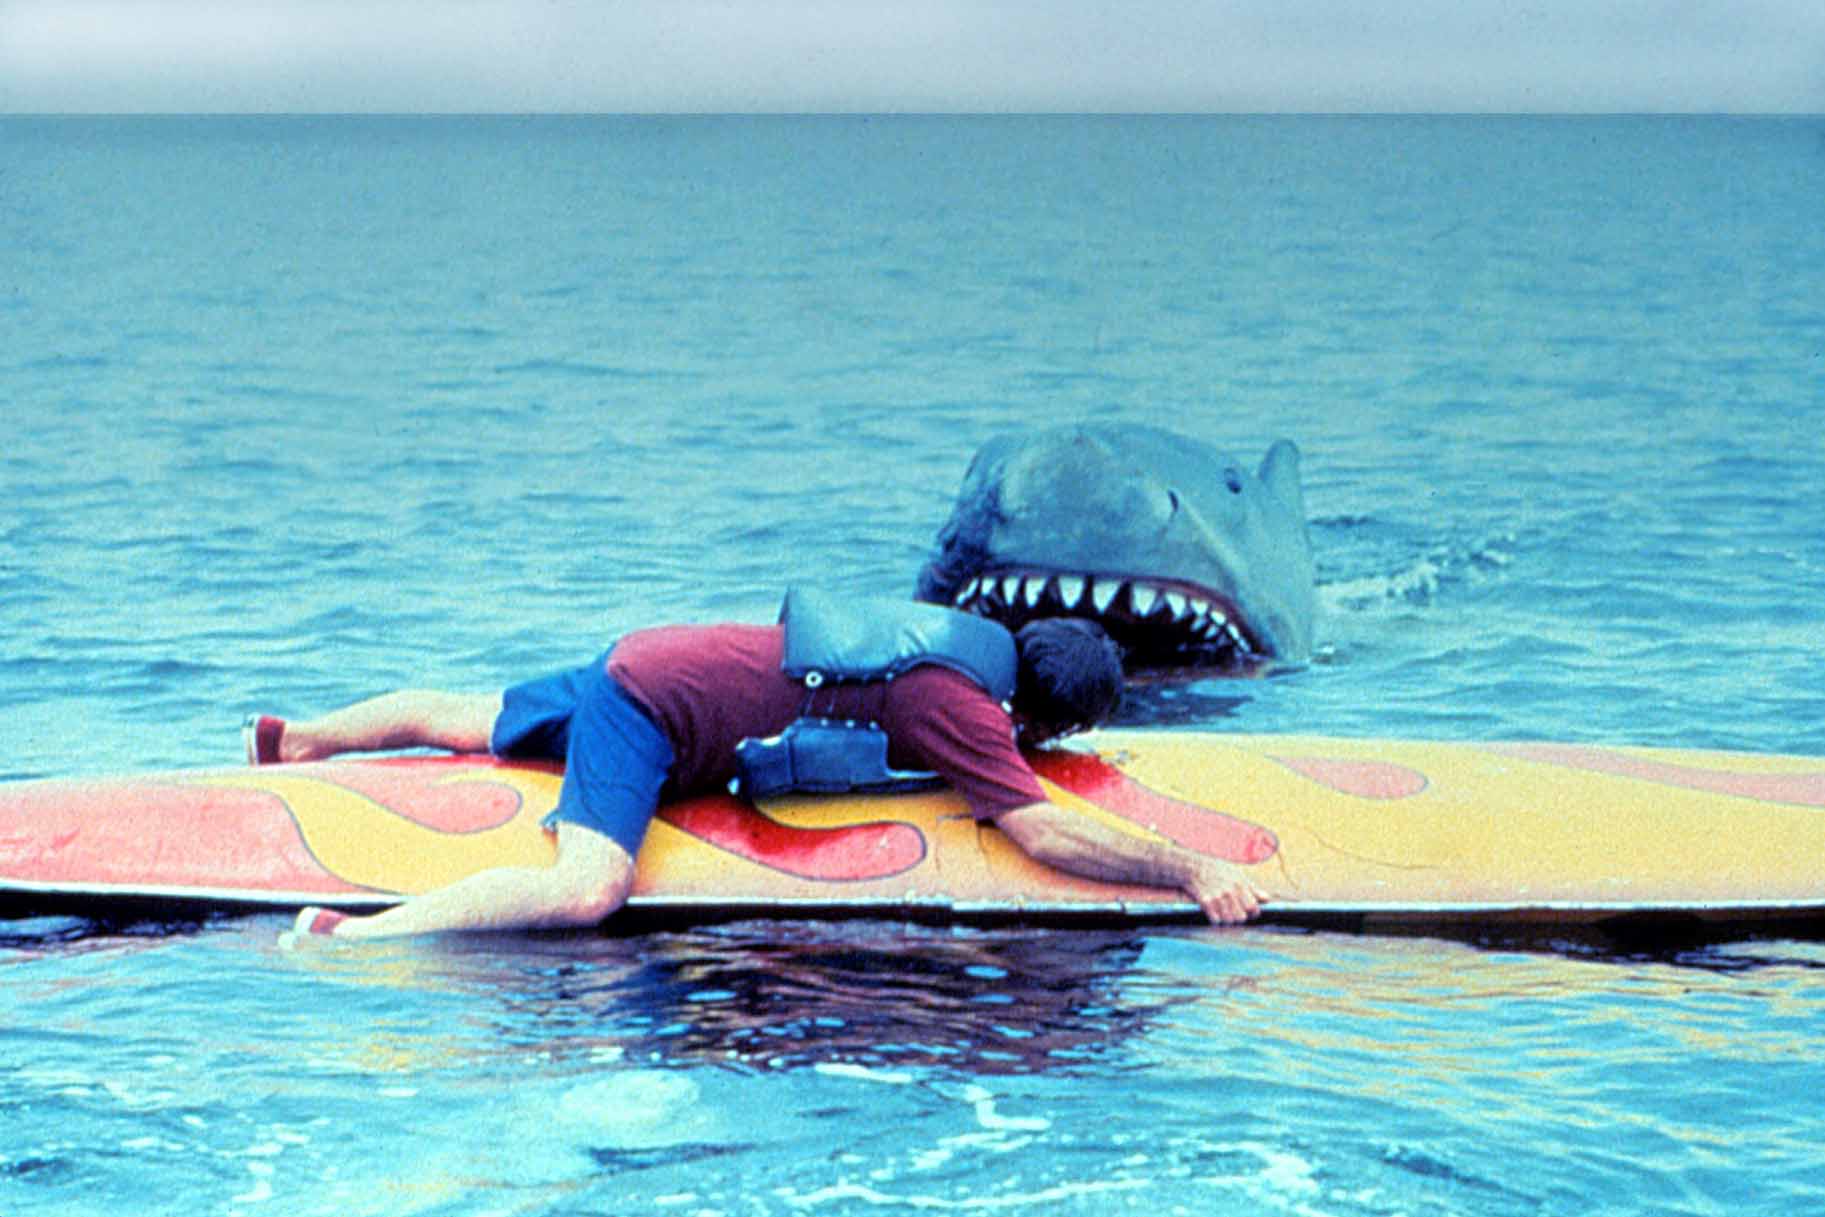 A Deep Dive into the Weird World of the Jaws Sequels